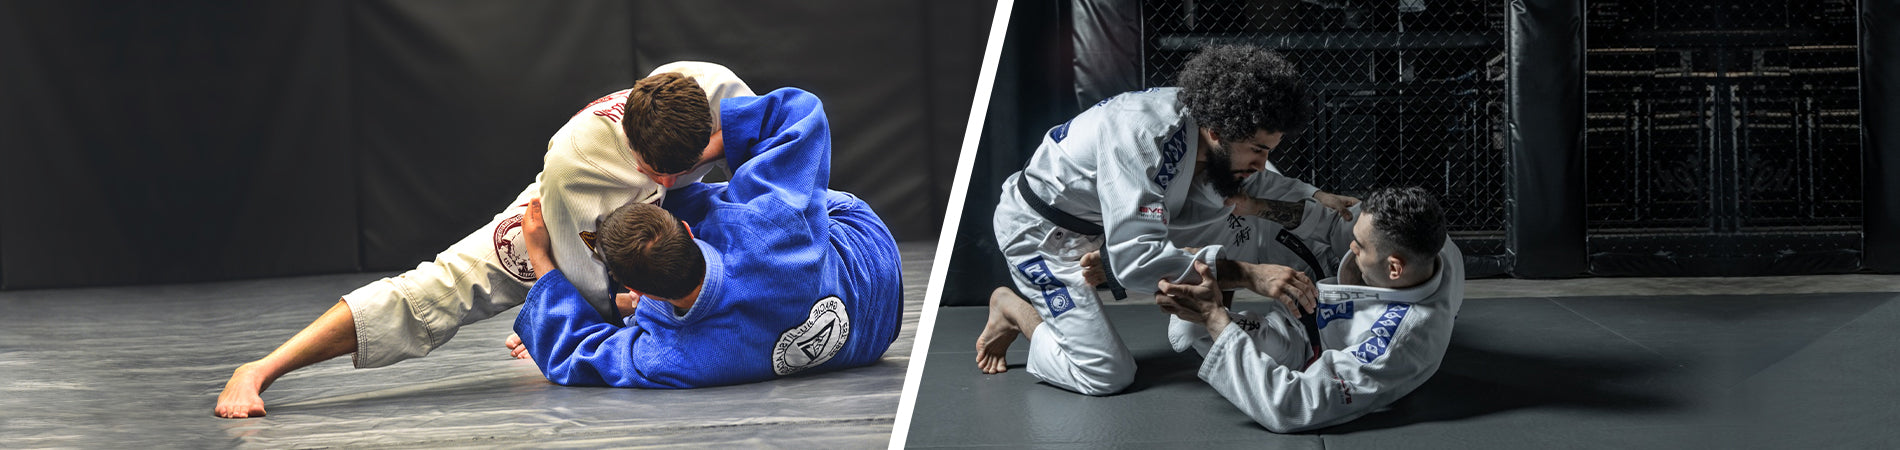 GJJ vs BJJ - What's the Difference and Similarities?